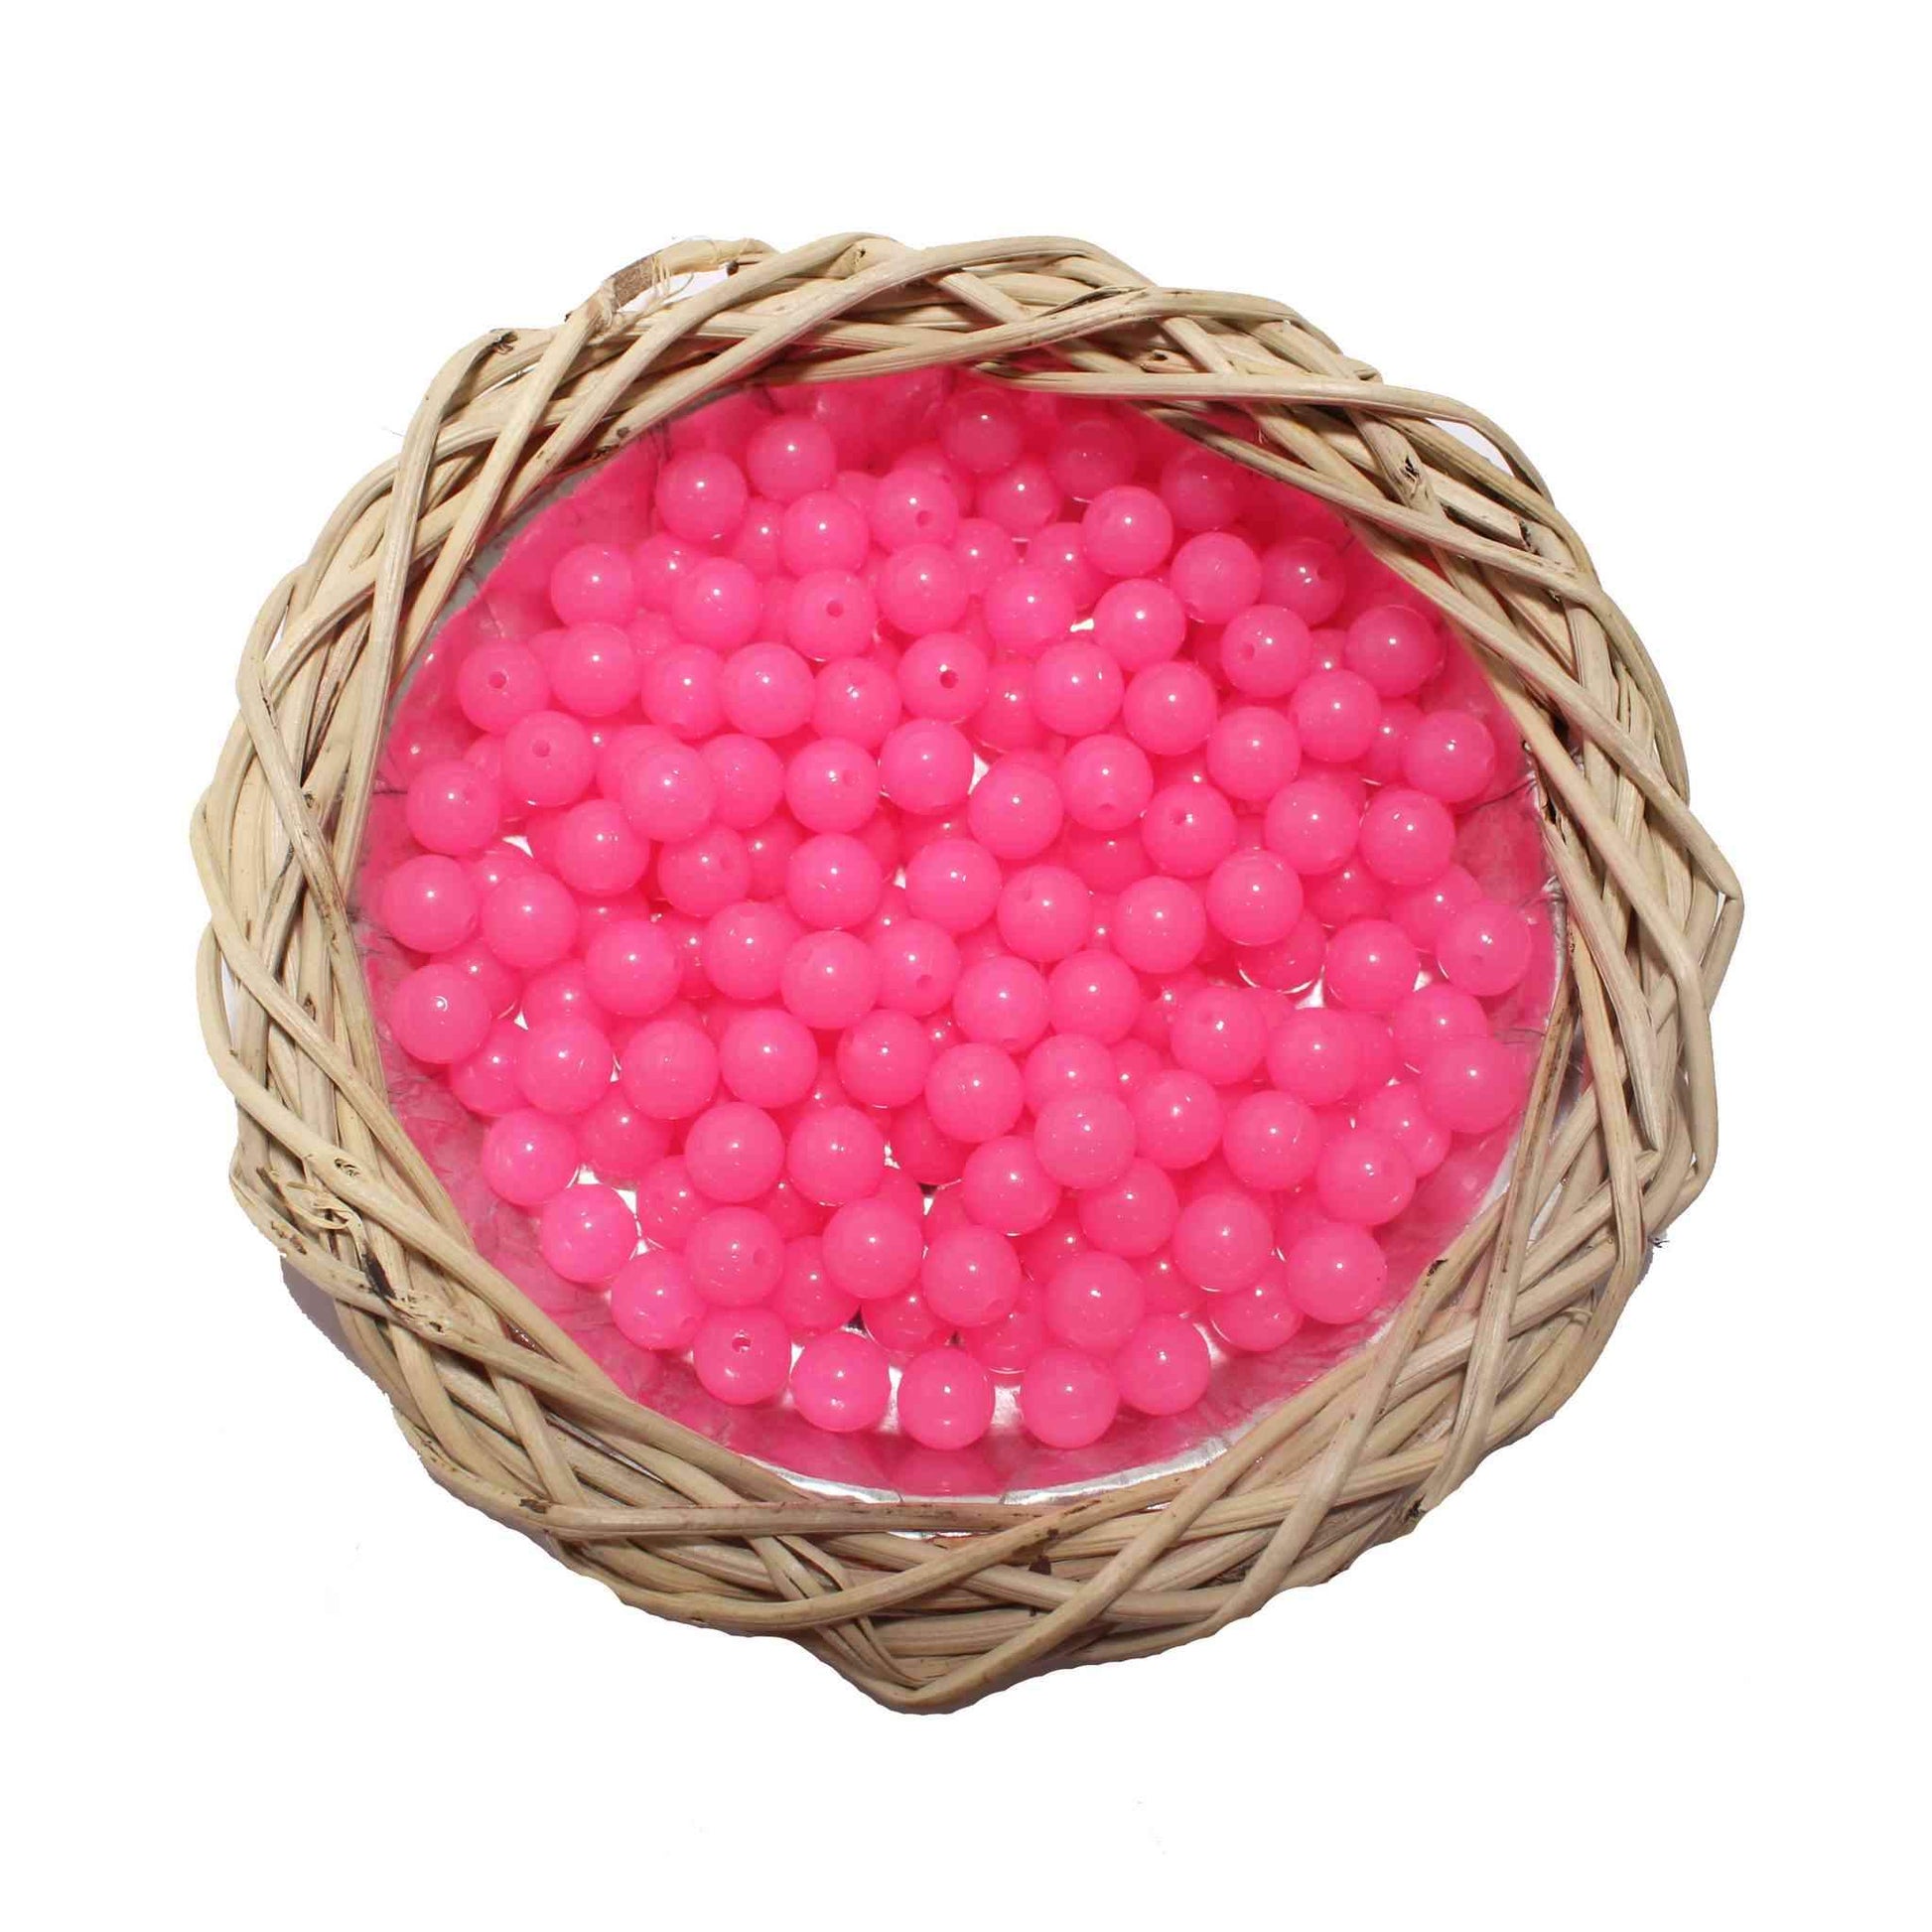 Premium quality Round Glass Beads for DIY Craft, Trousseau Packing or Decoration - Design 734, Hot Pink - Indian Petals